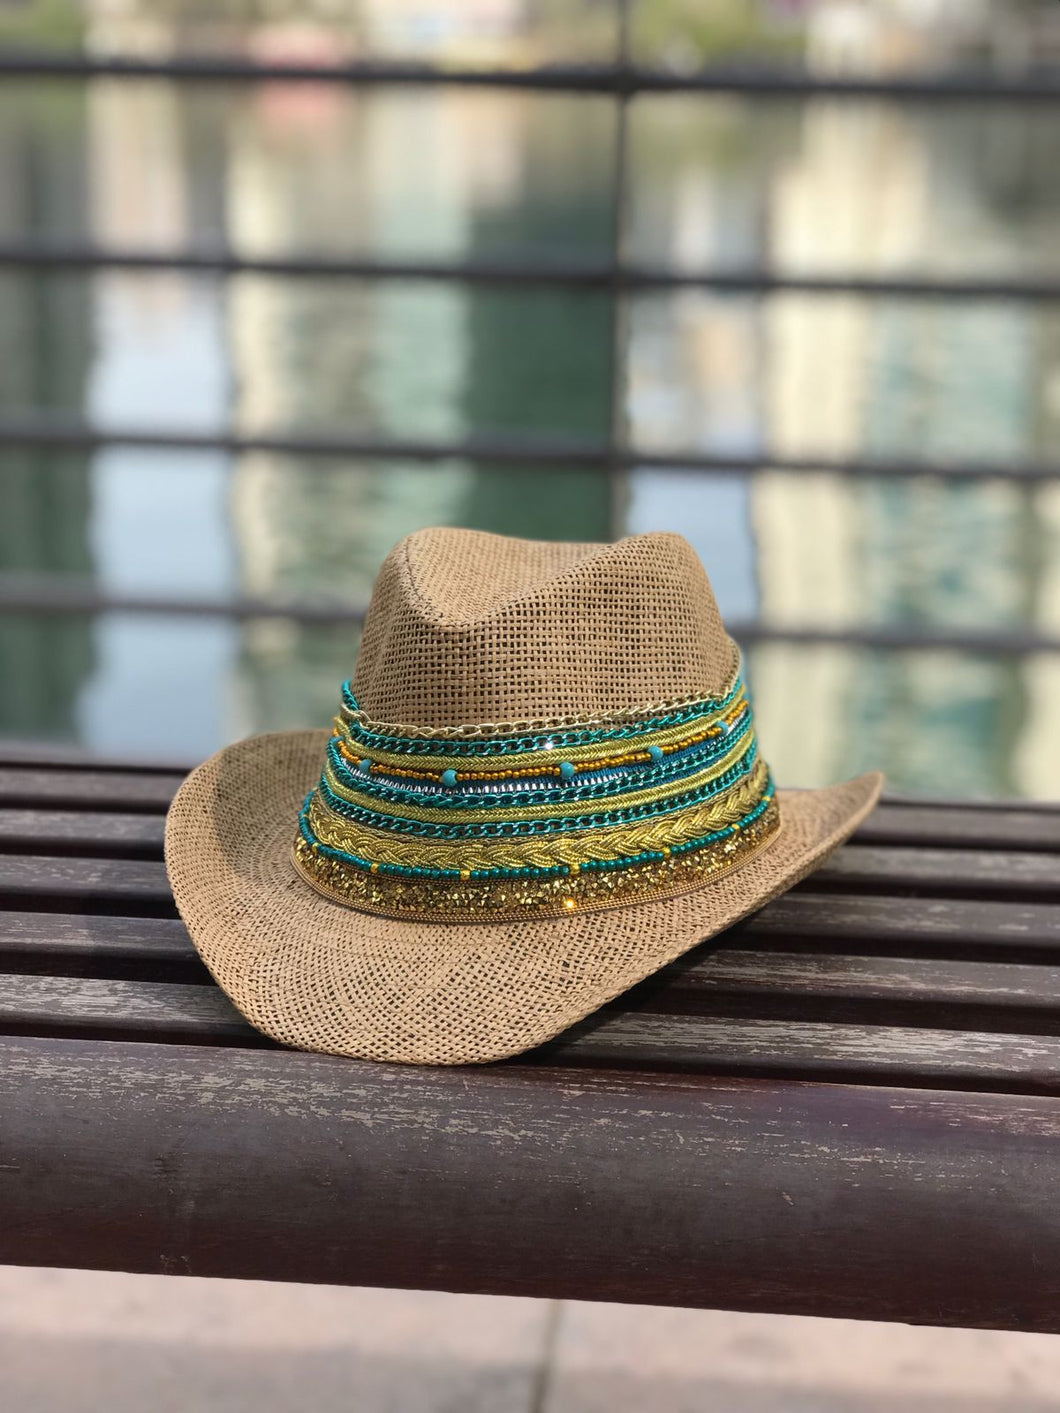 Cowboy hat with blue & gold chain